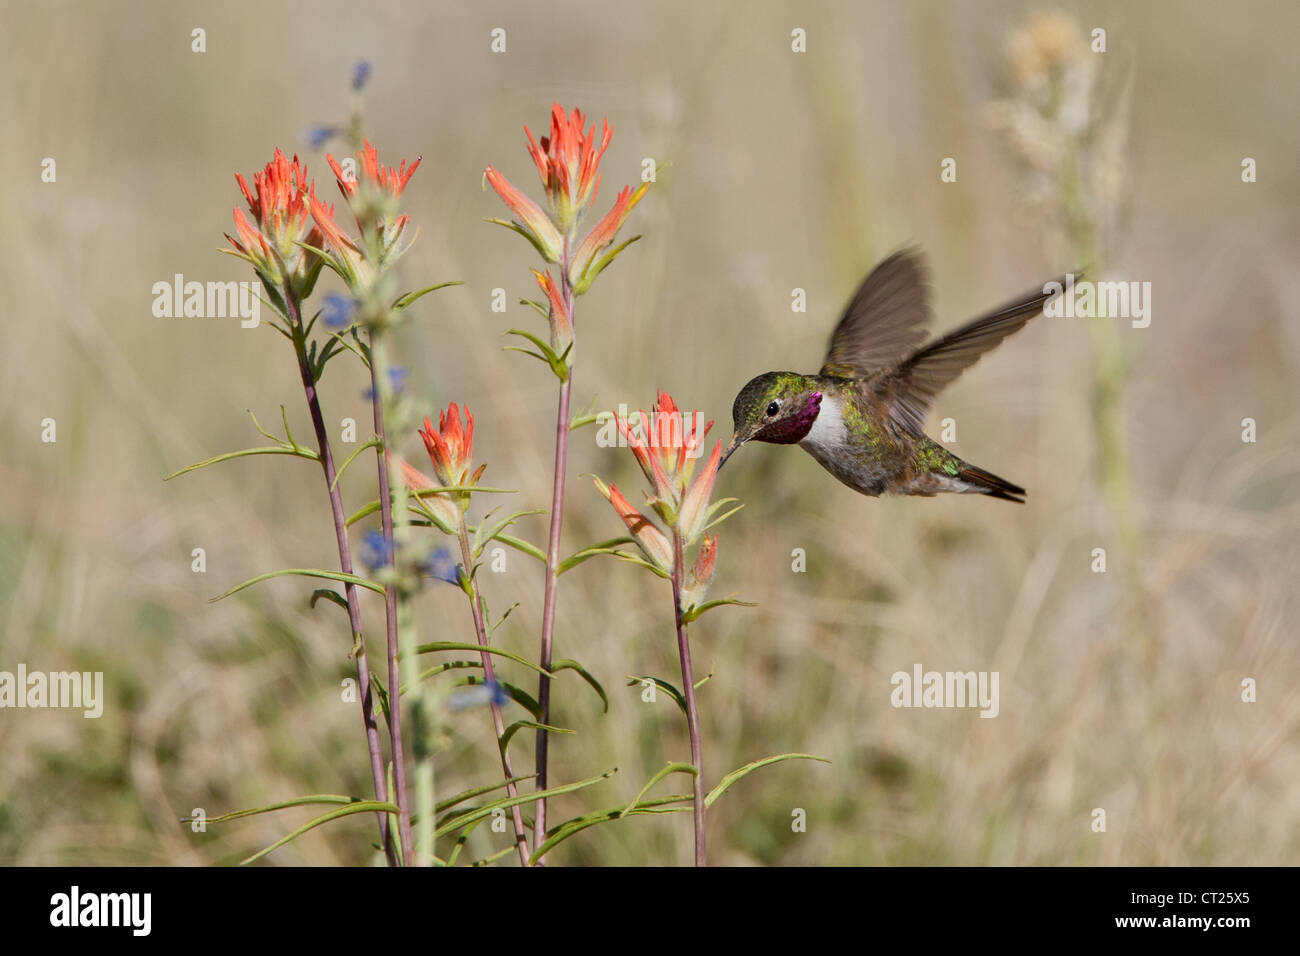 A Broad-tailed Hummingbird bird hovering getting nectar from Indian Paintbrush flowers blooms blossoms Stock Photo